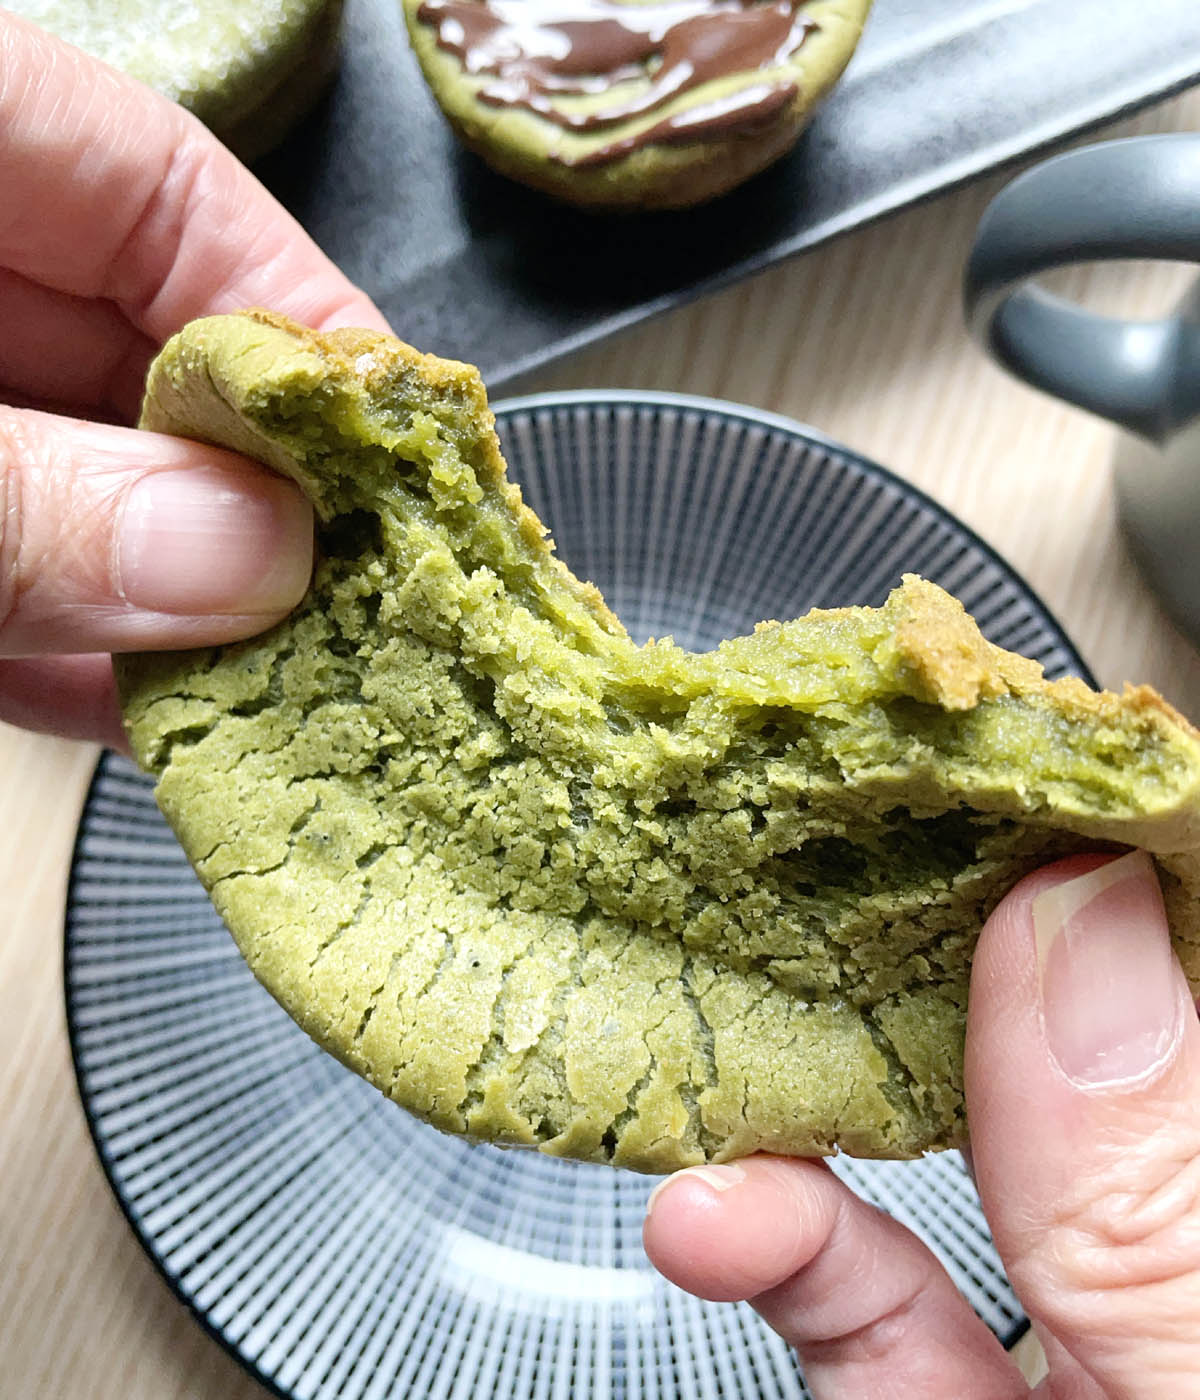 Close-up of two hands pulling apart a green muffin.